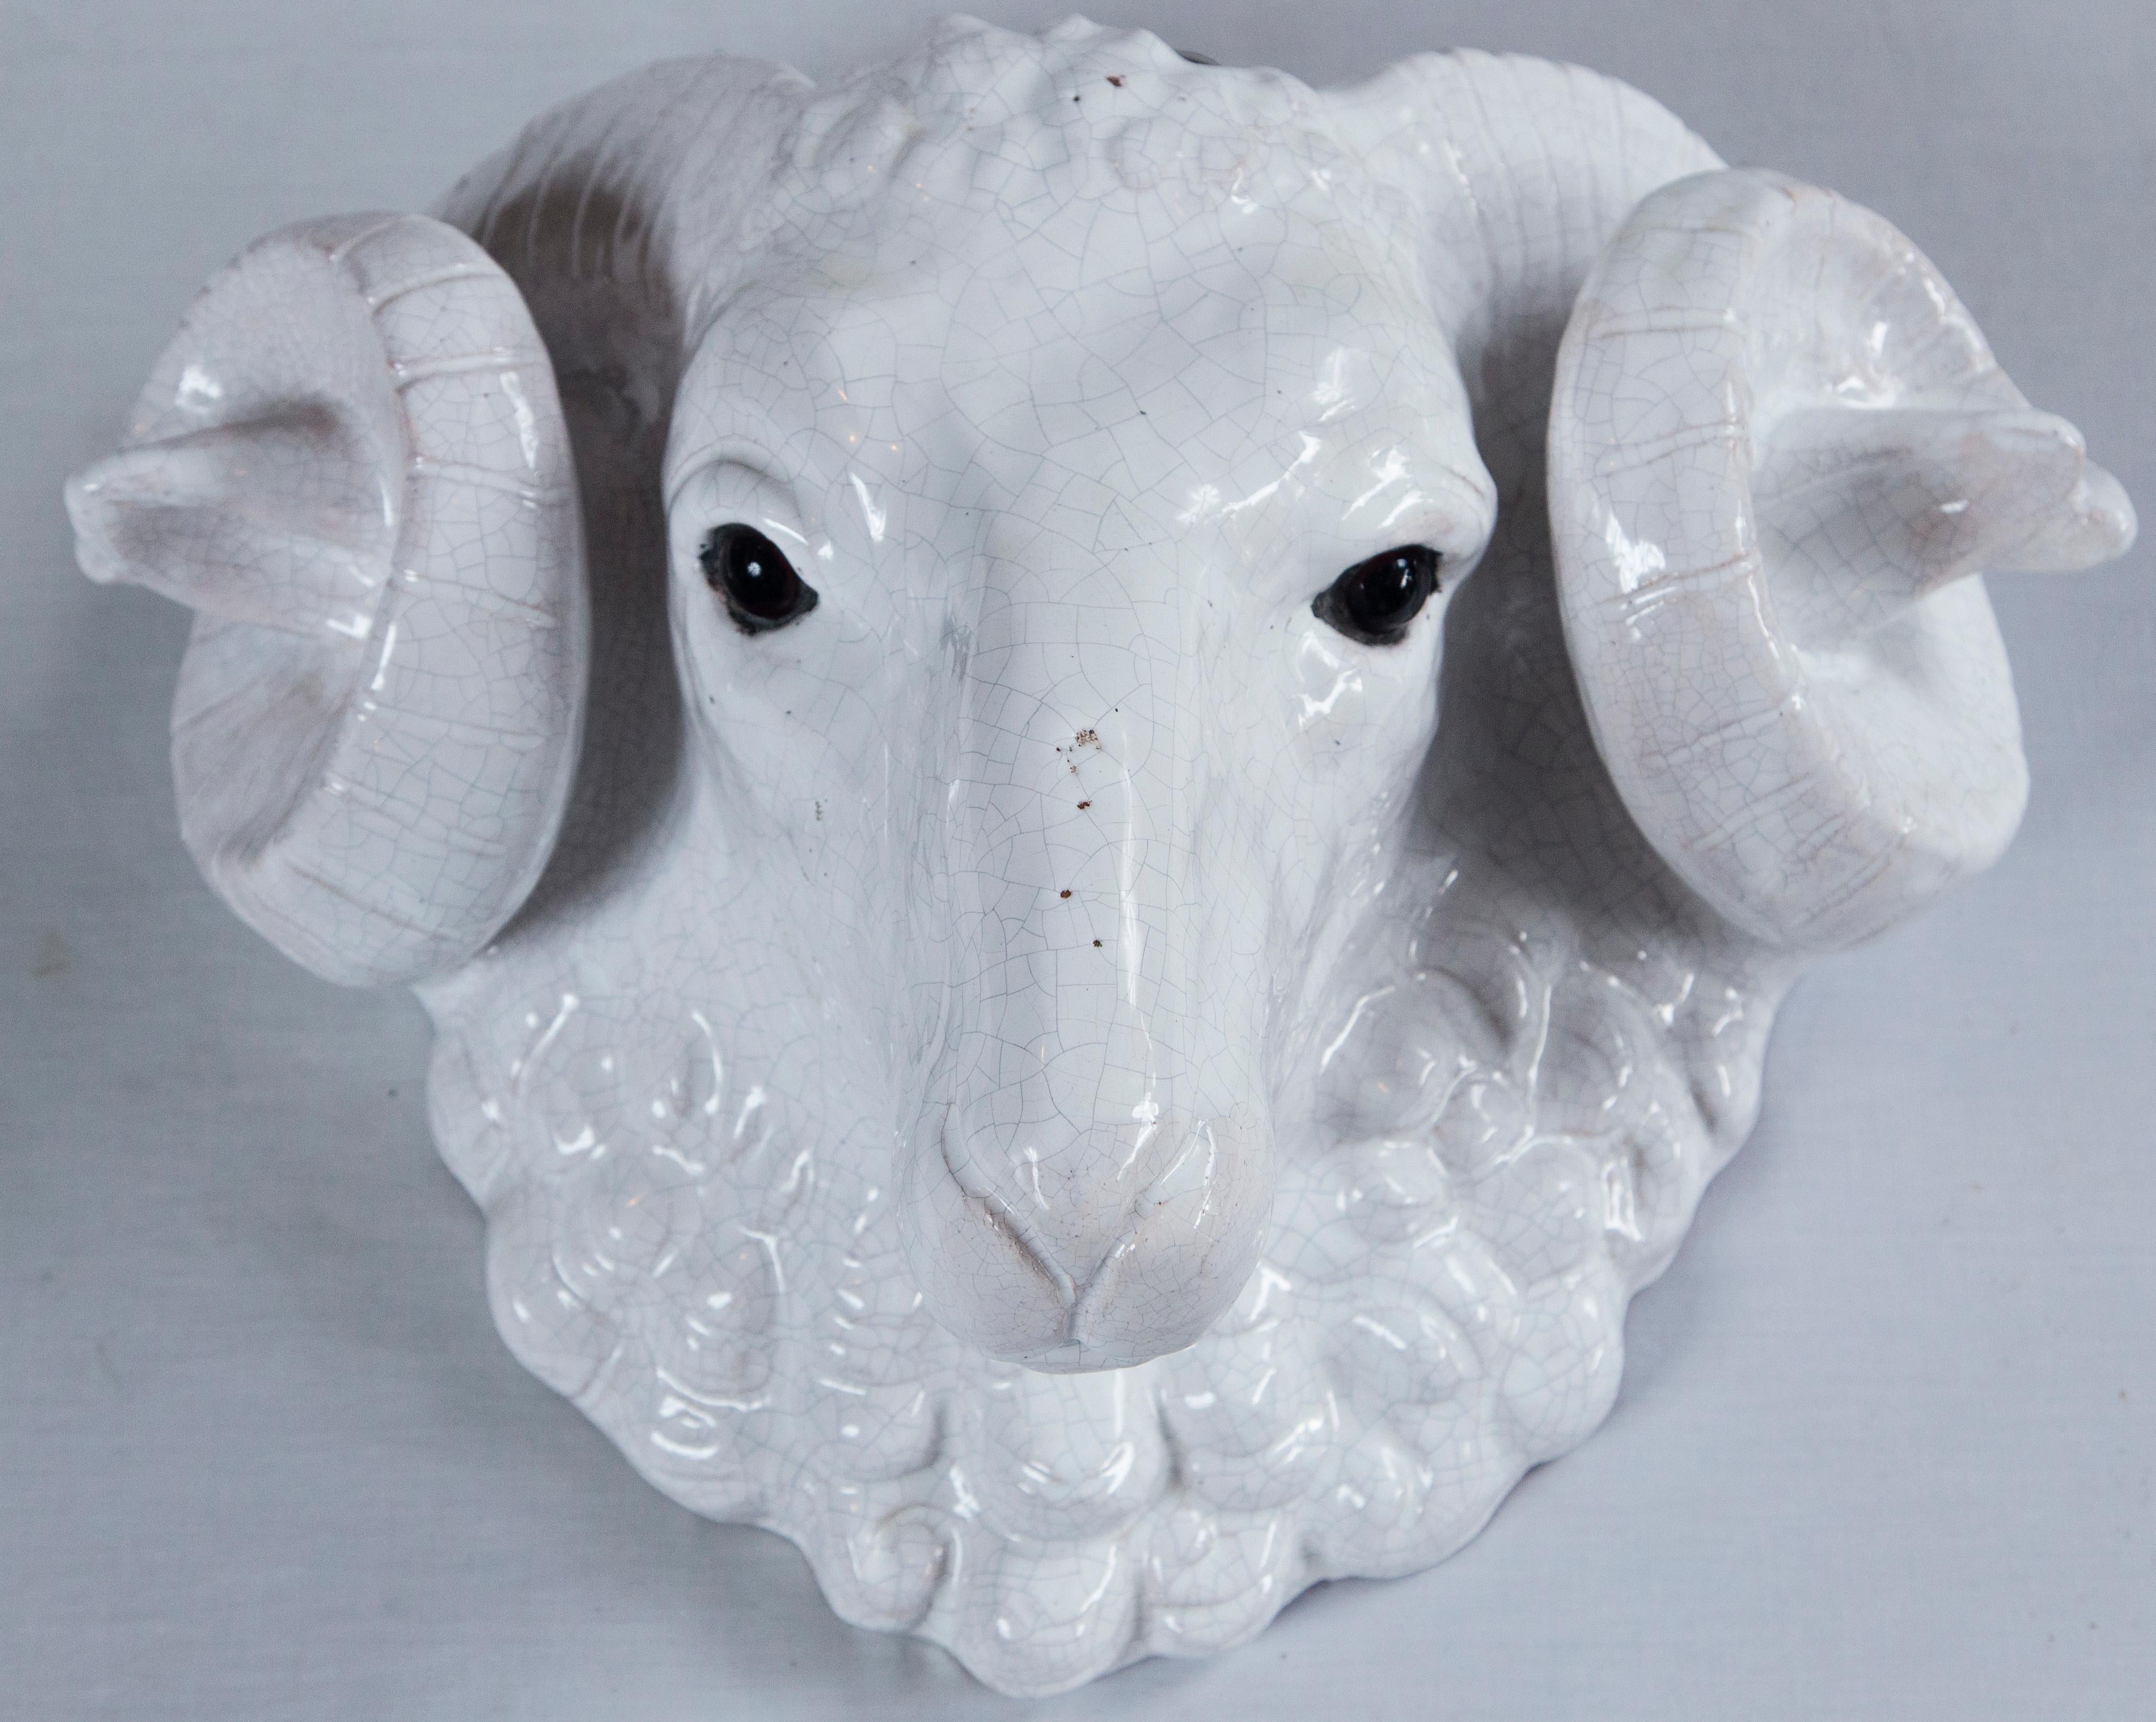 Antique French Faience Ram's Head, Bavent, circa 1900. White craquelure glaze with glass eyes. Beautifully detailed. Designed to hang on a wall. Pottery du Mesnil de Bavent in Normandy, France, was established in 1842.